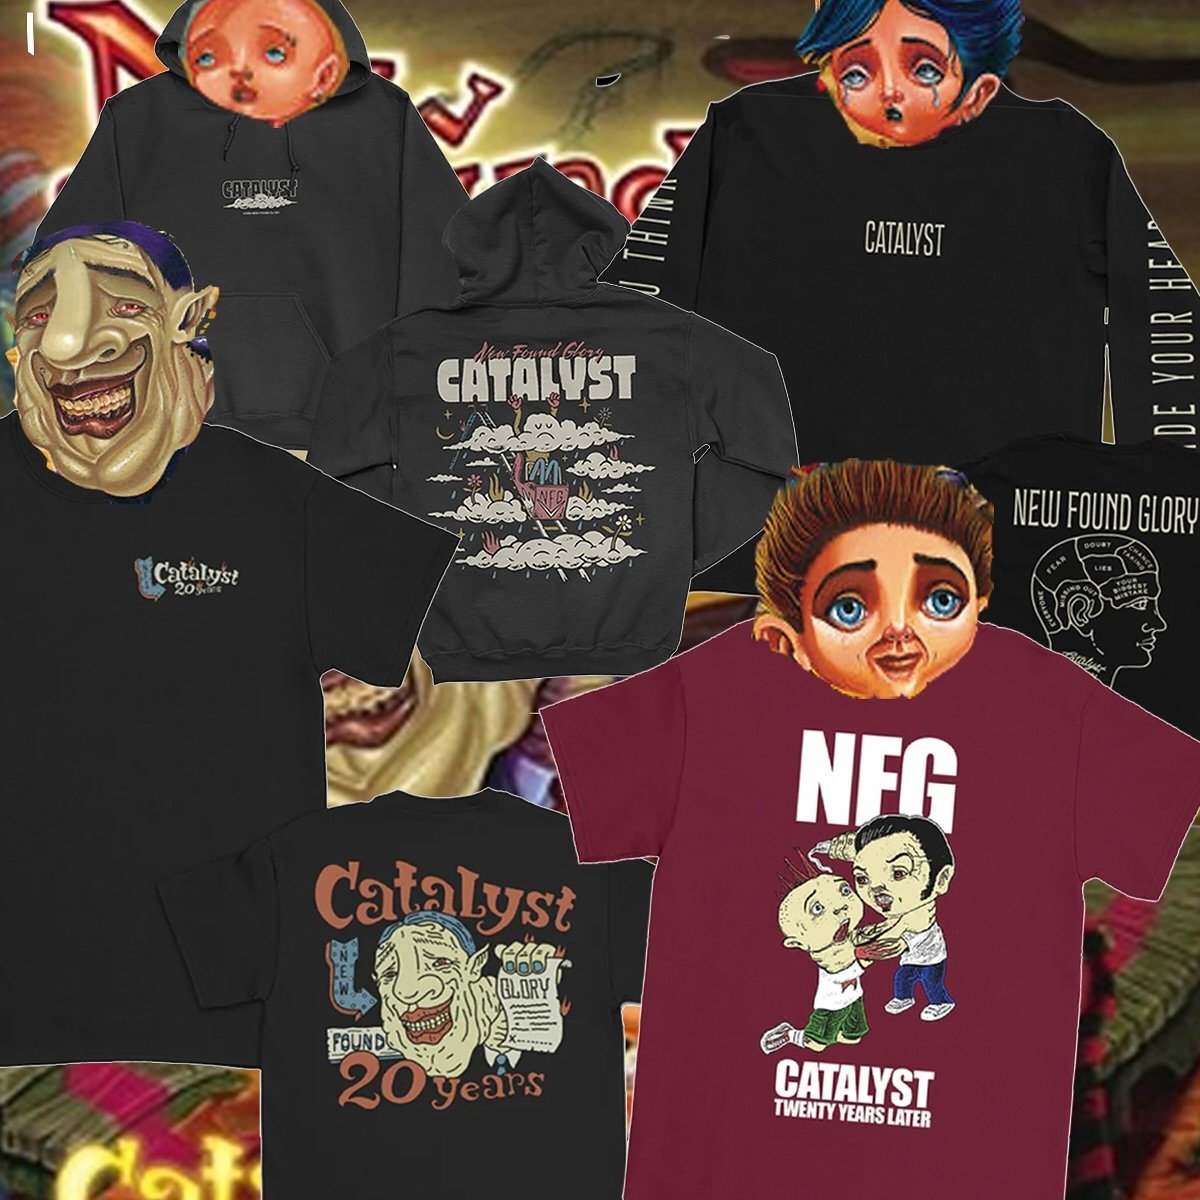 MERCH &mdash; More Catalyst merch for the Catalyst lovers out there including the Maroon &ldquo;Punk Kid&rdquo; shirt! If you missed the CD release timed drop shirt, newfoundglorystuff.com still has you covered!!!